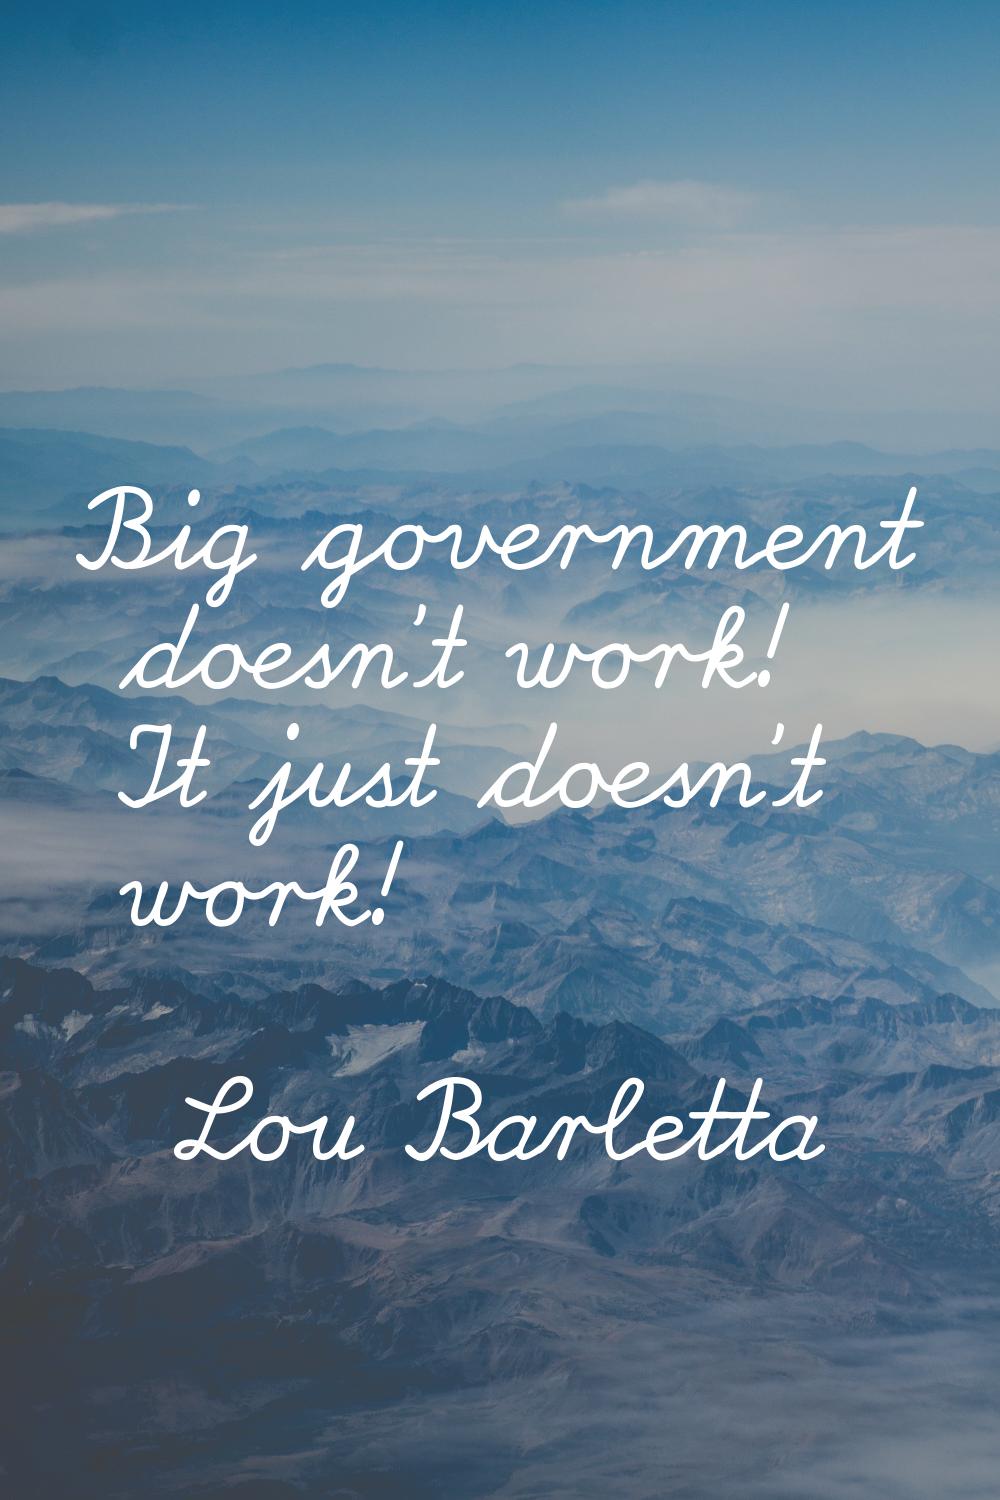 Big government doesn't work! It just doesn't work!